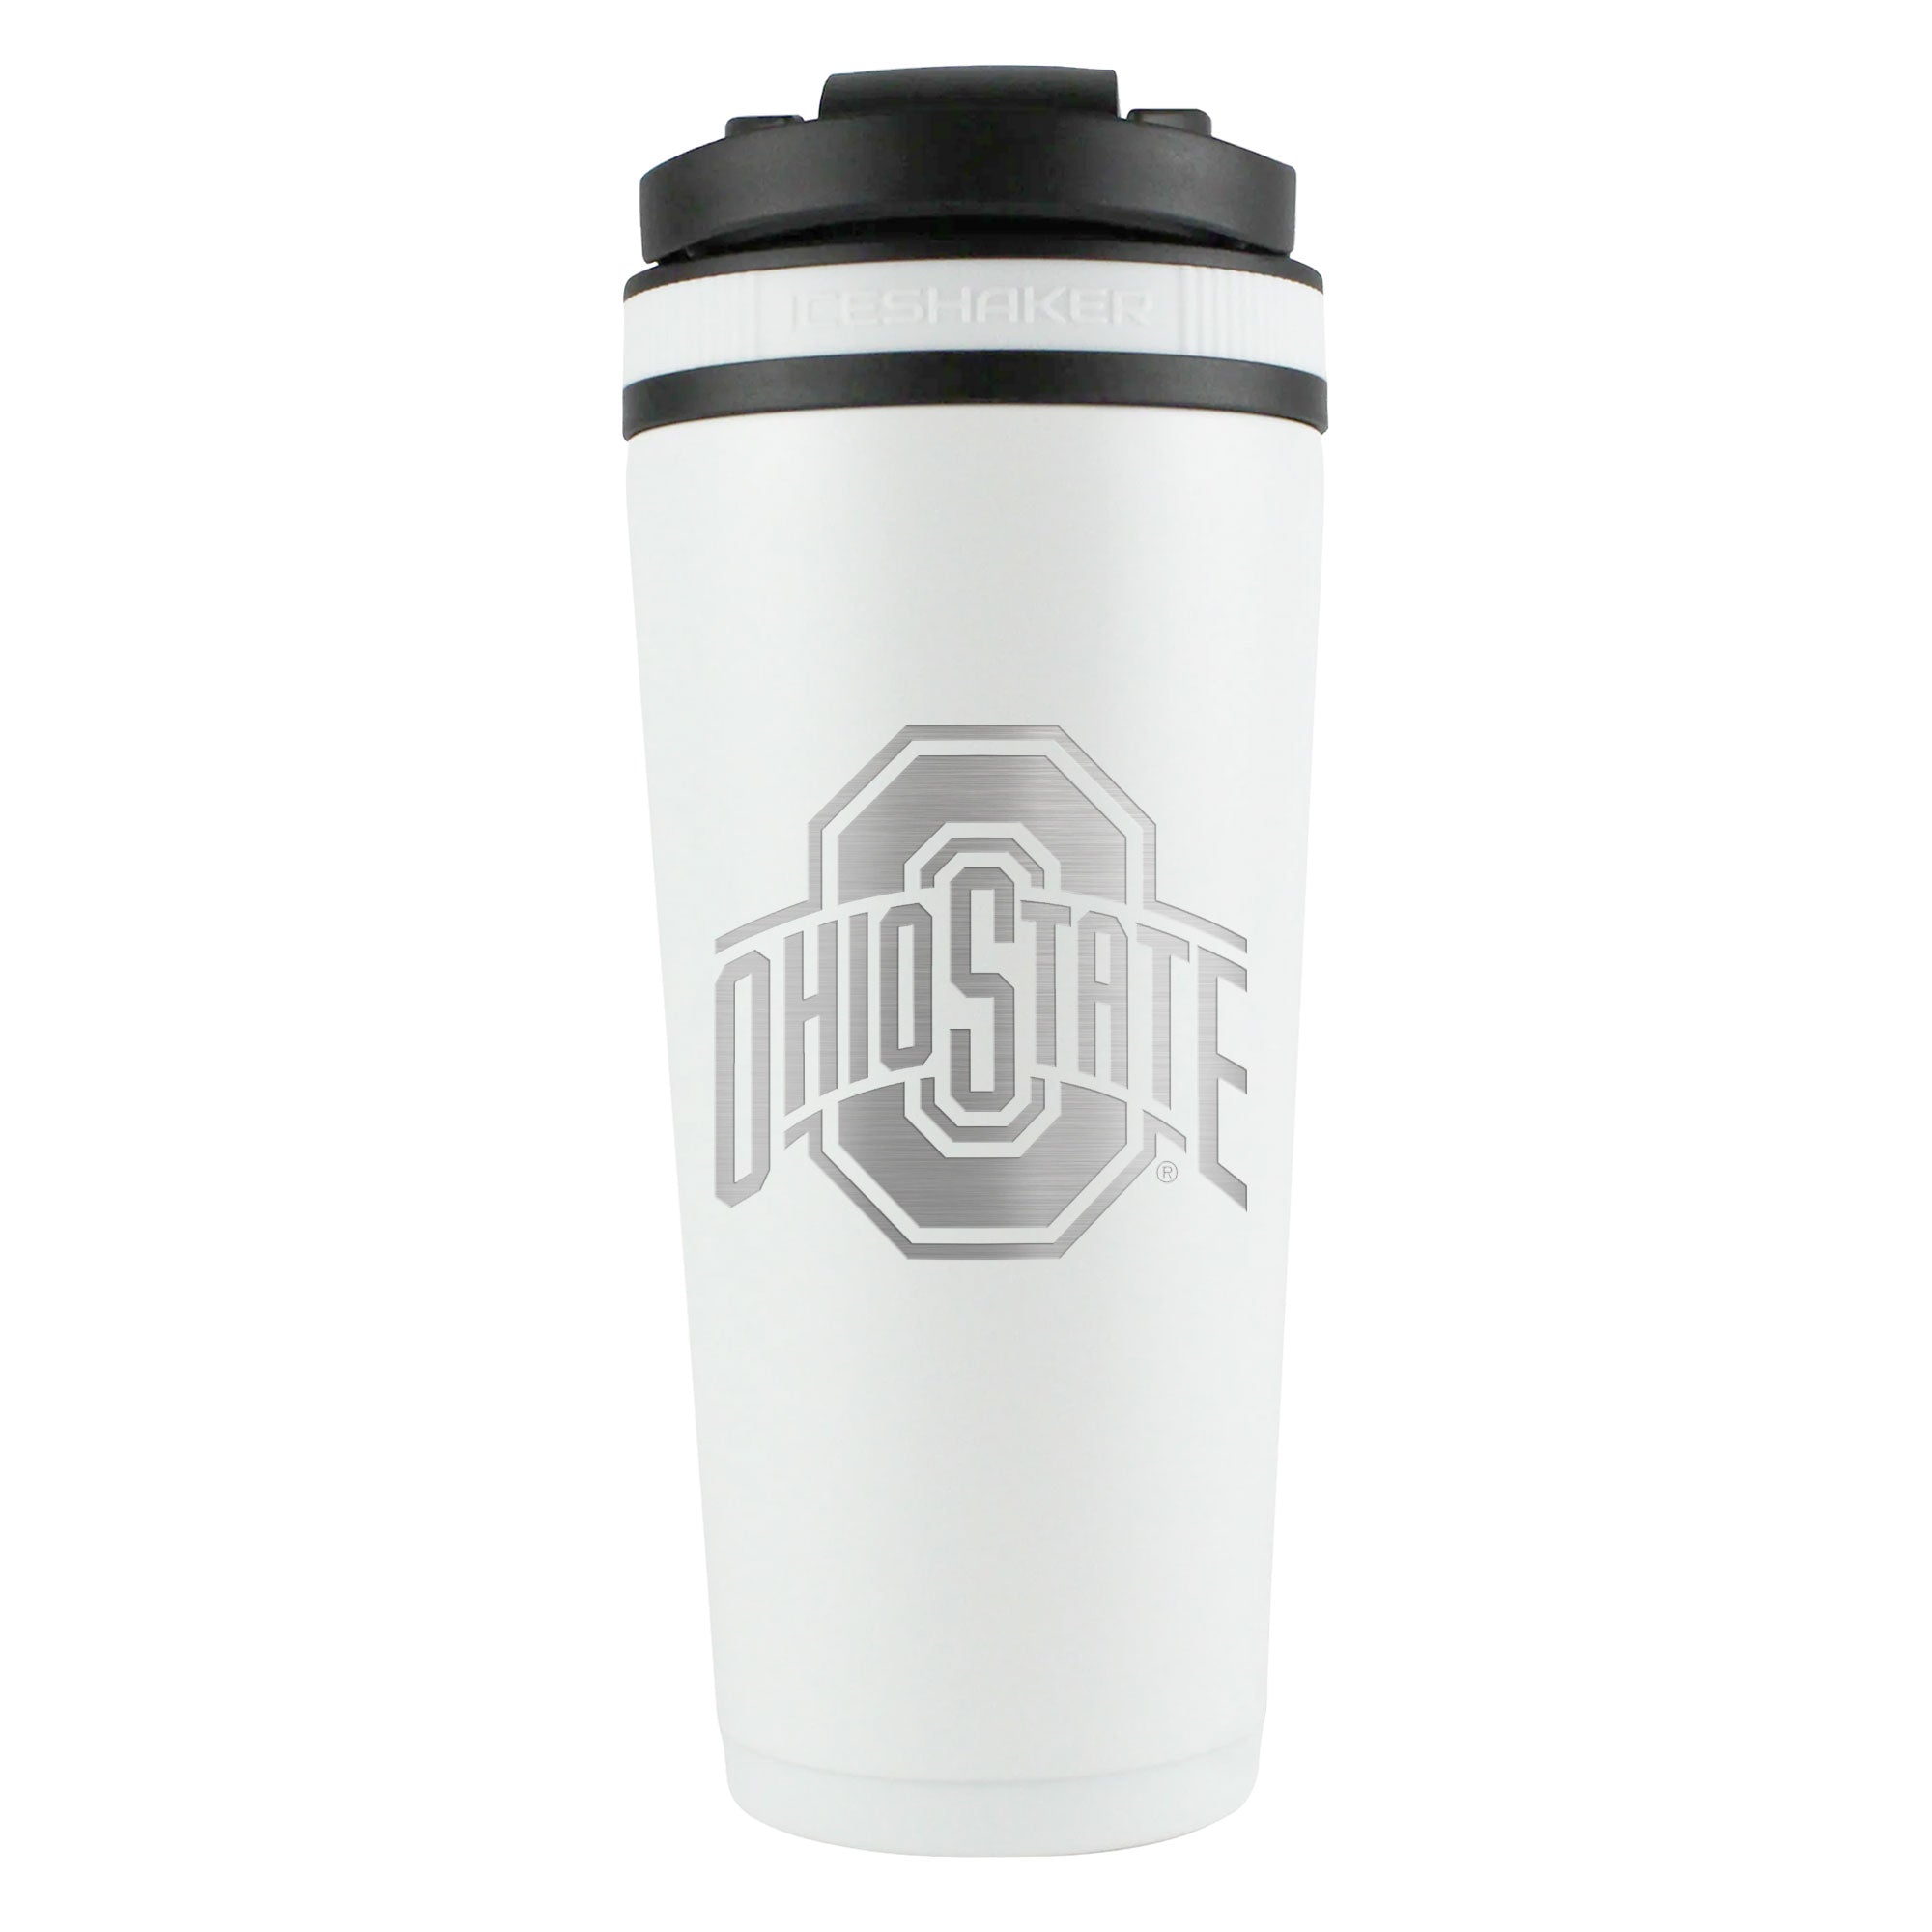 Officially Licensed Ohio State 26oz Ice Shaker - White